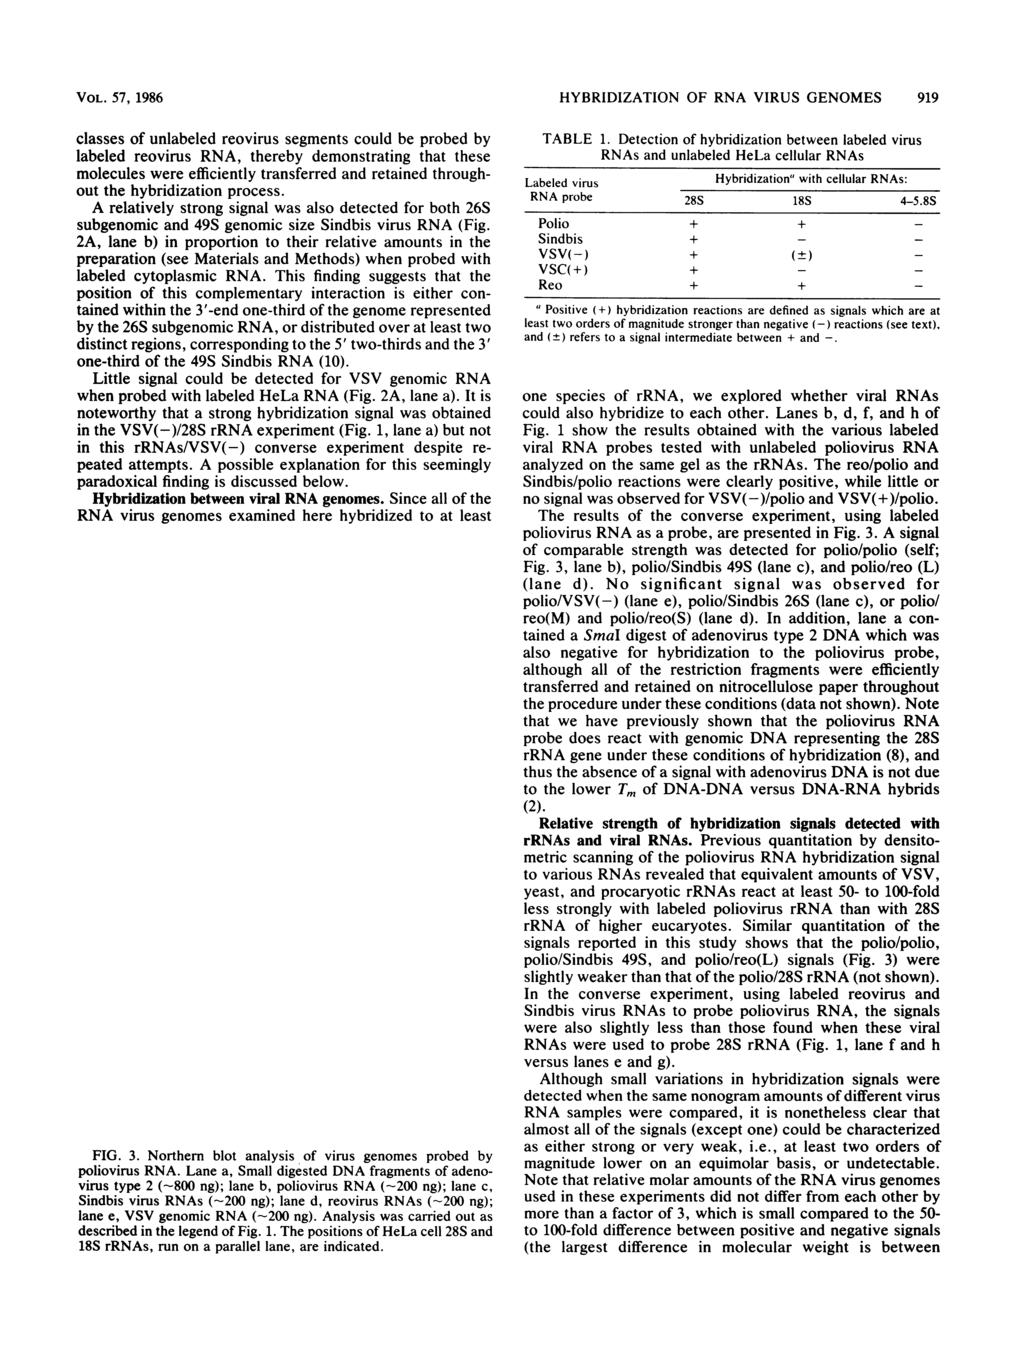 VOL. 57, 1986 classes of unlabeled reovirus segments could be probed by labeled reovirus RNA, thereby demonstrating that these molecules were efficiently transferred and retained throughout the